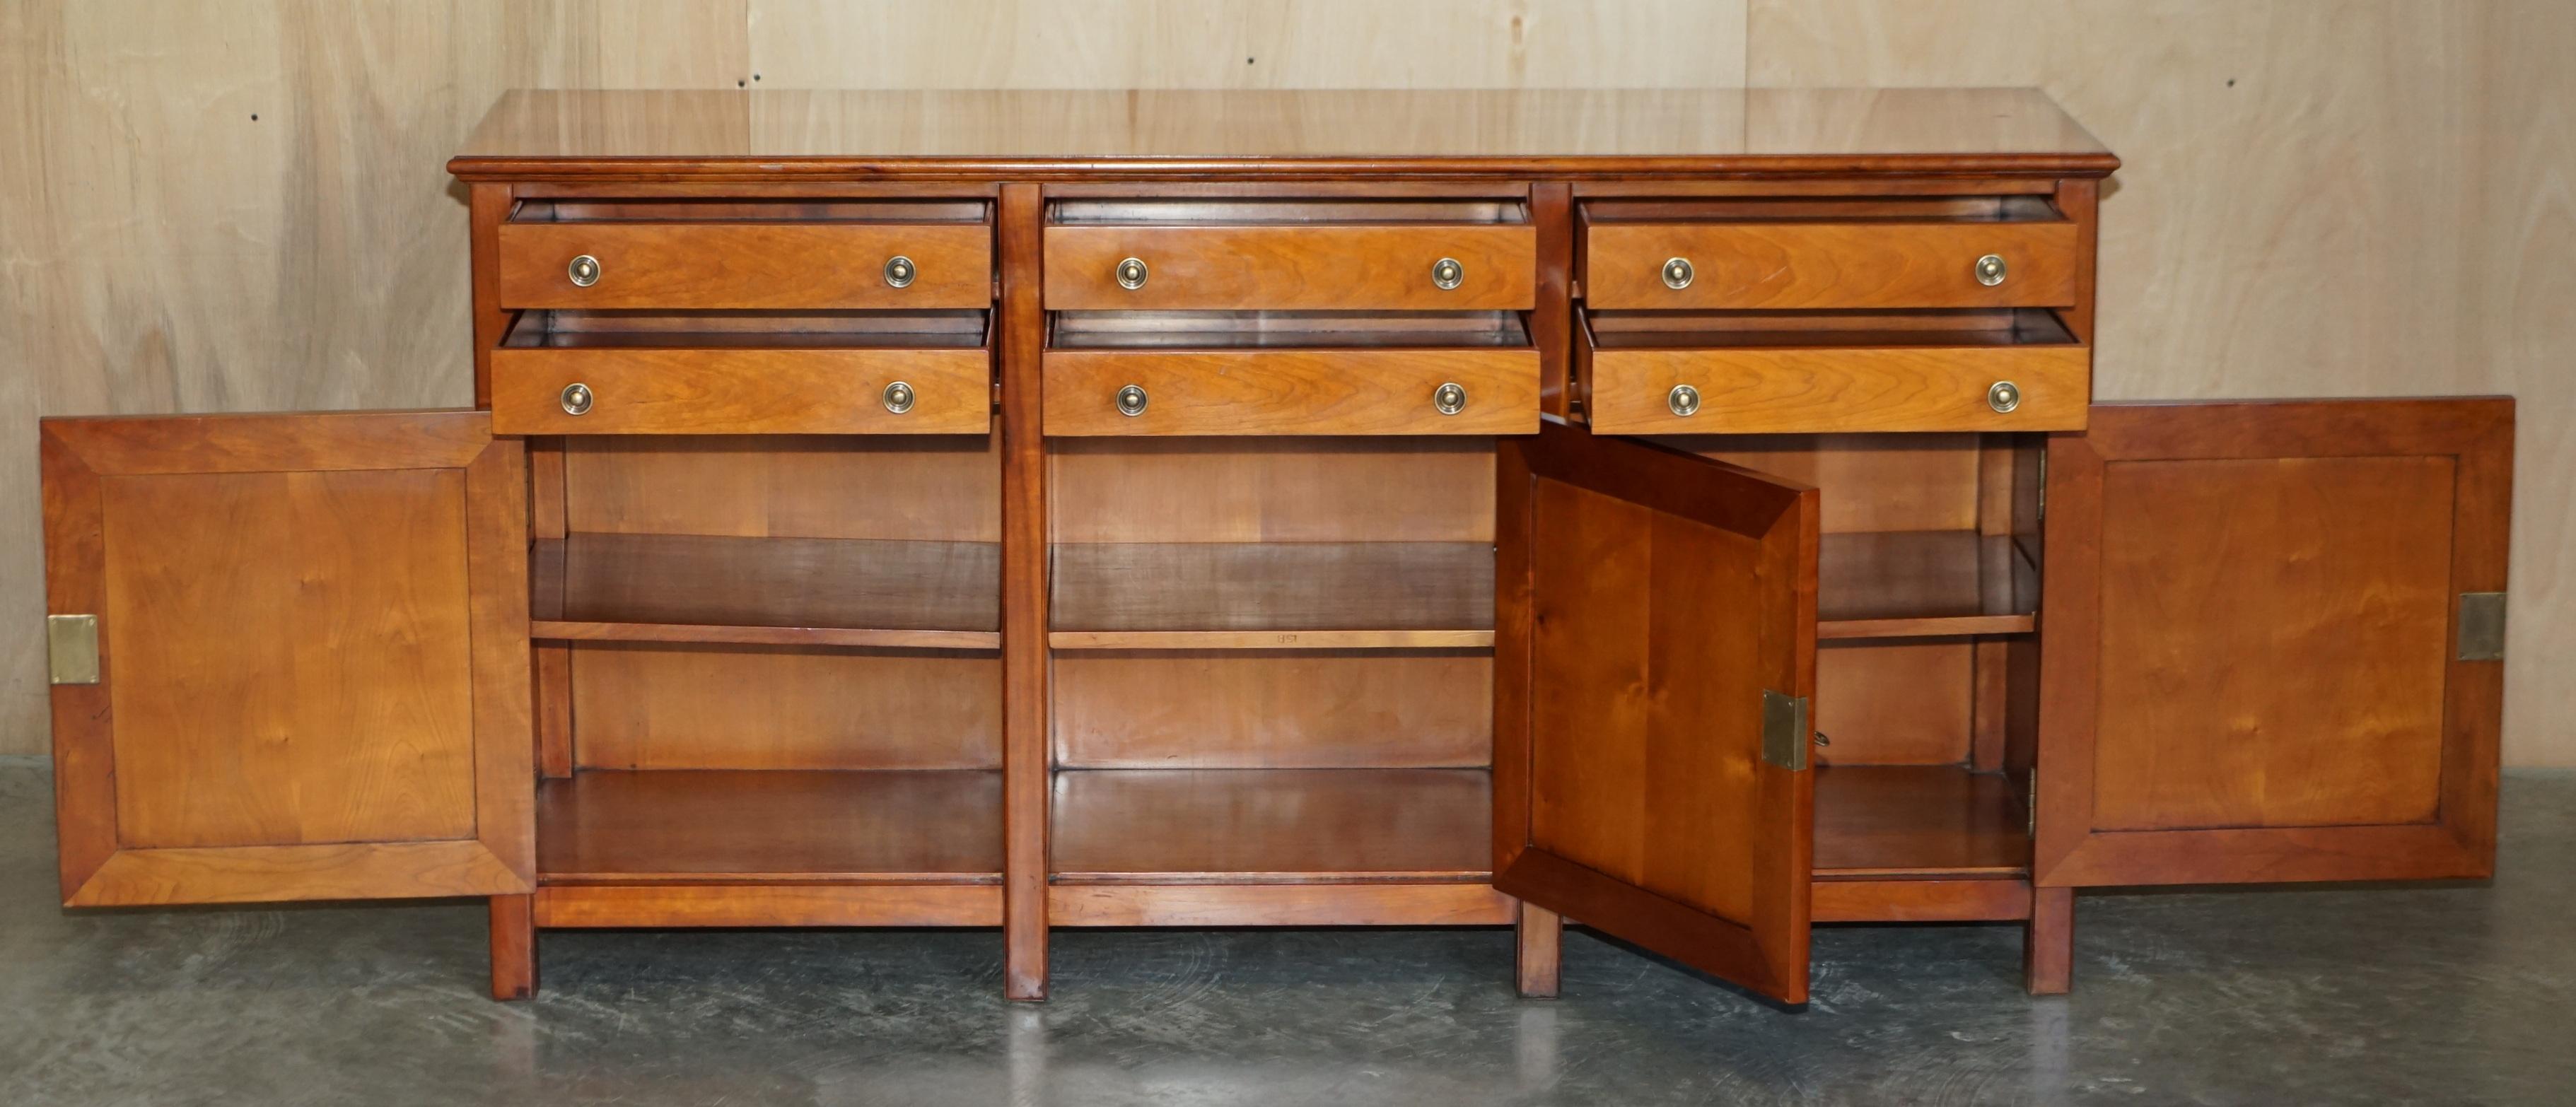 Large & Heavy Solid Cherrywood Multiyork Sideboard Cupboard with Six Drawers For Sale 10